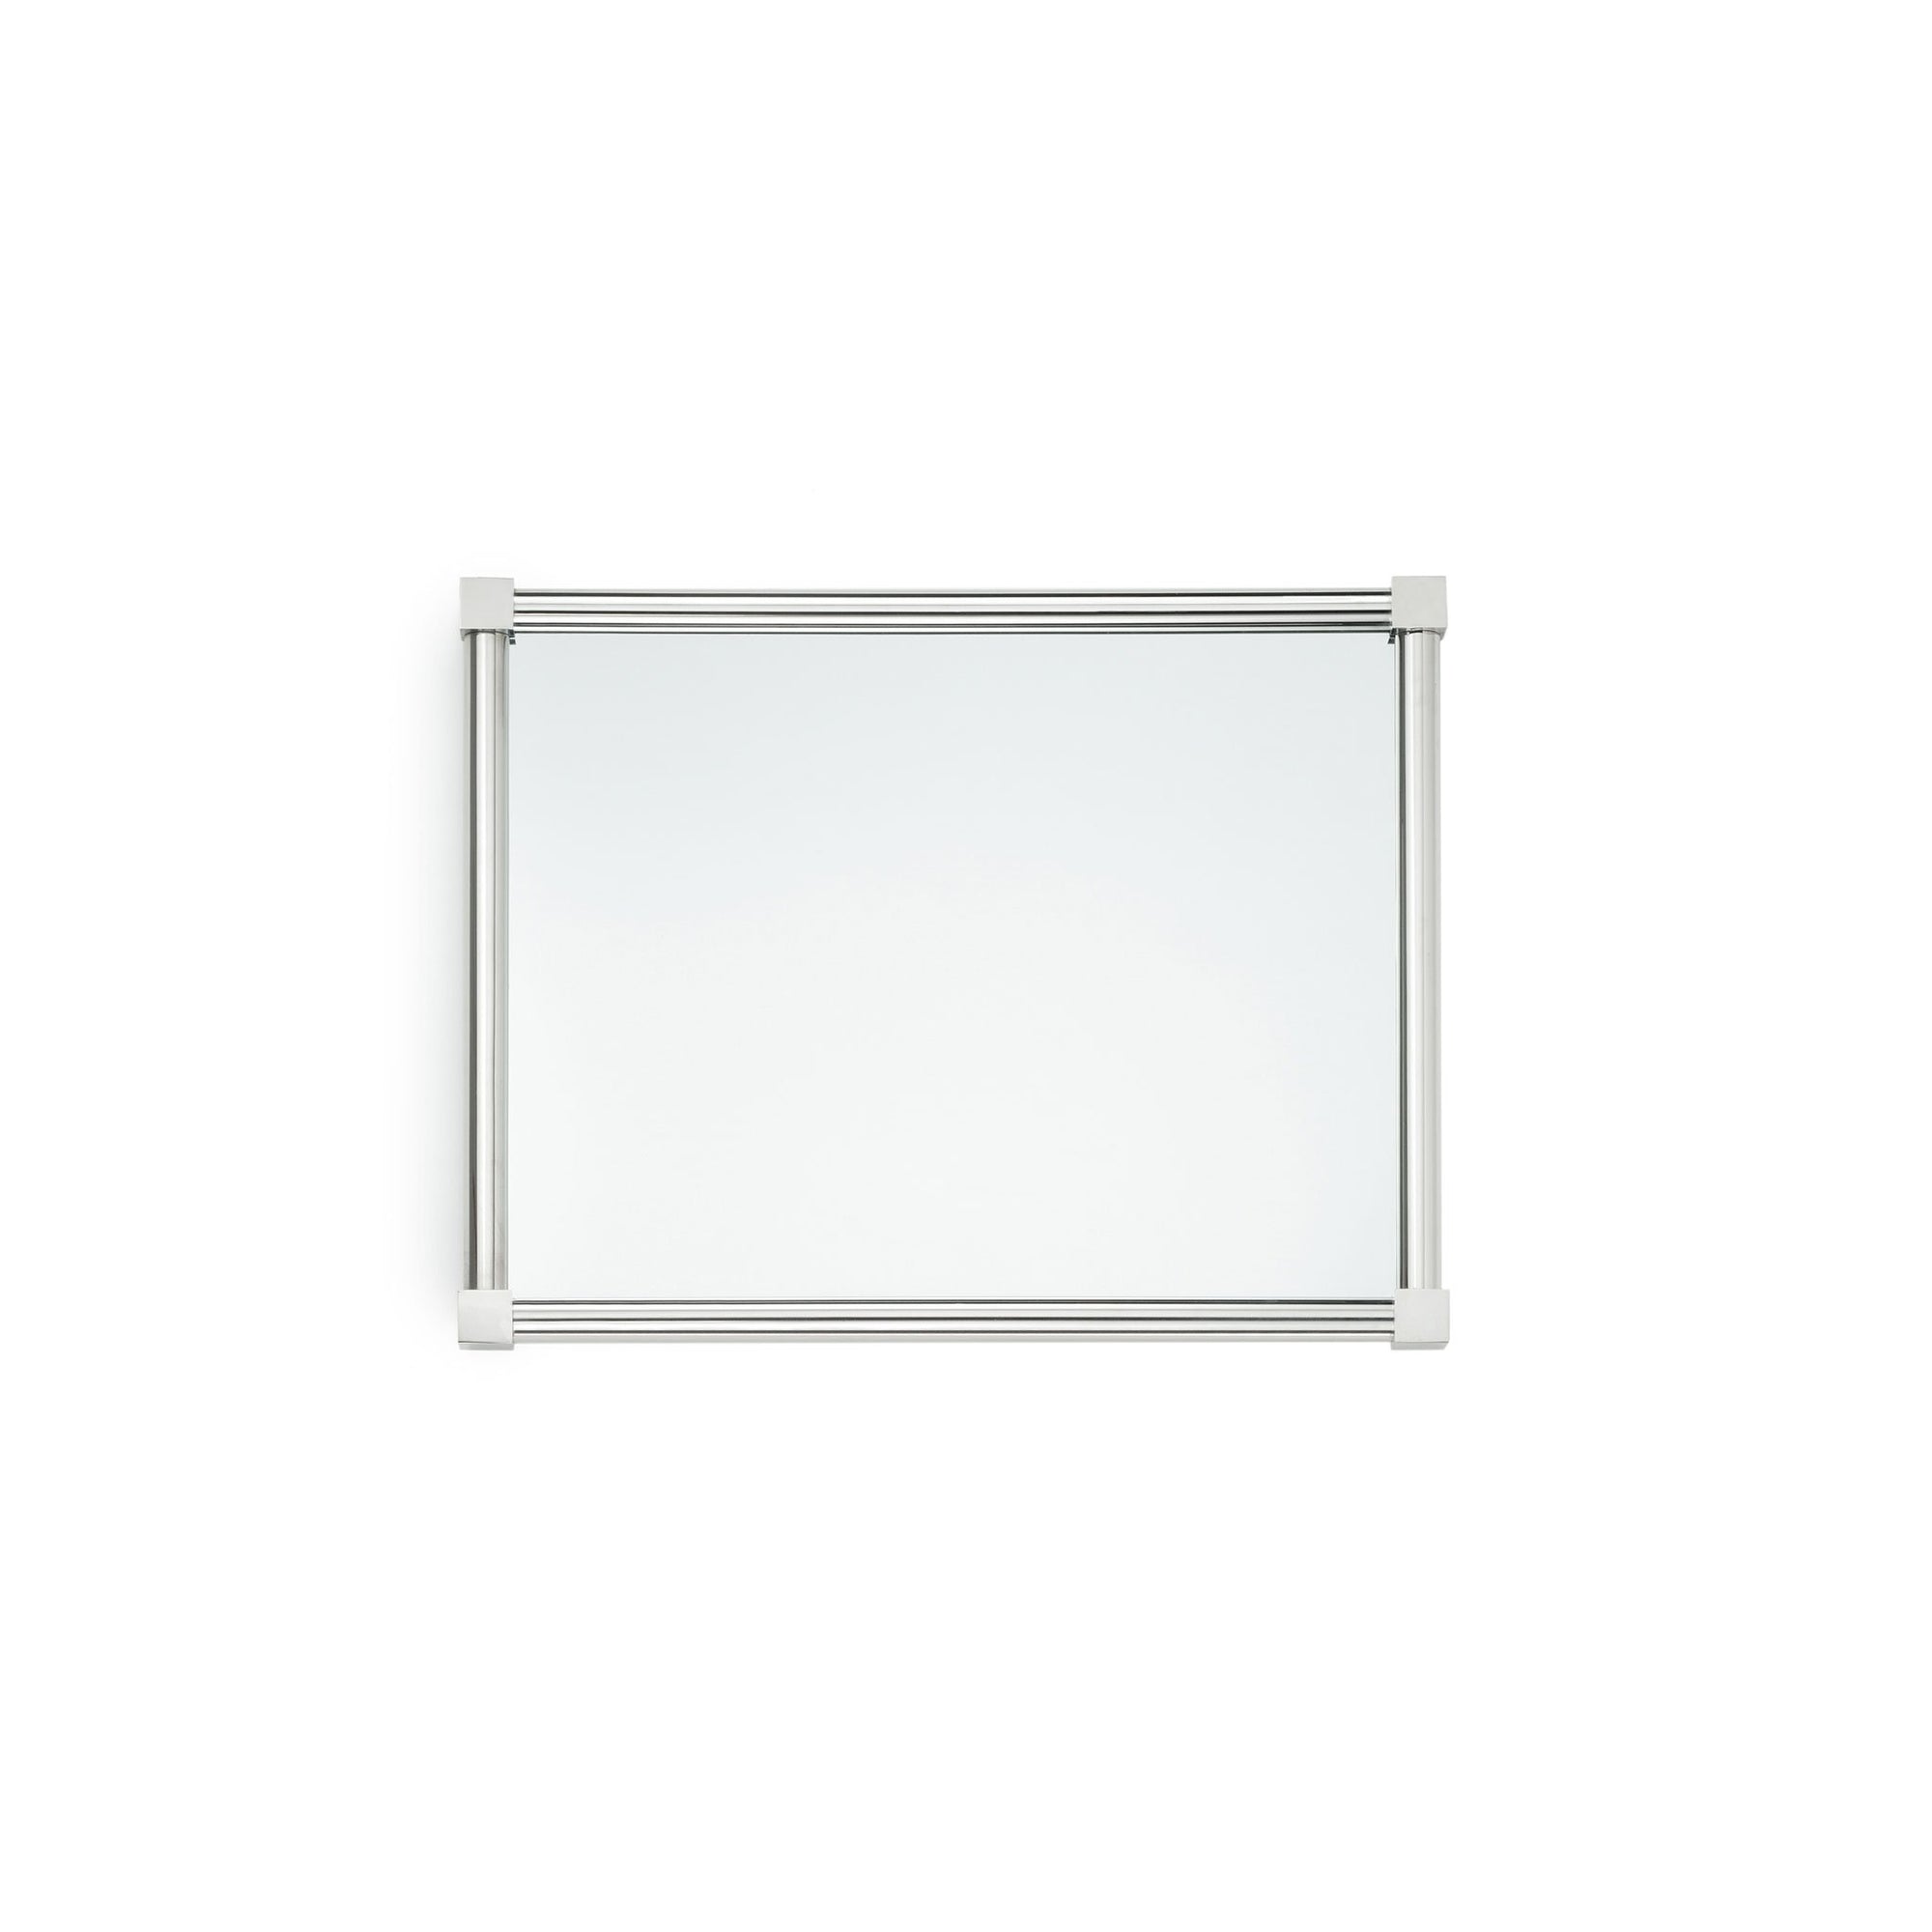 4250M21-PN Sherle Wagner International Square Knuckle Mirror in Polished Nickel metal finish